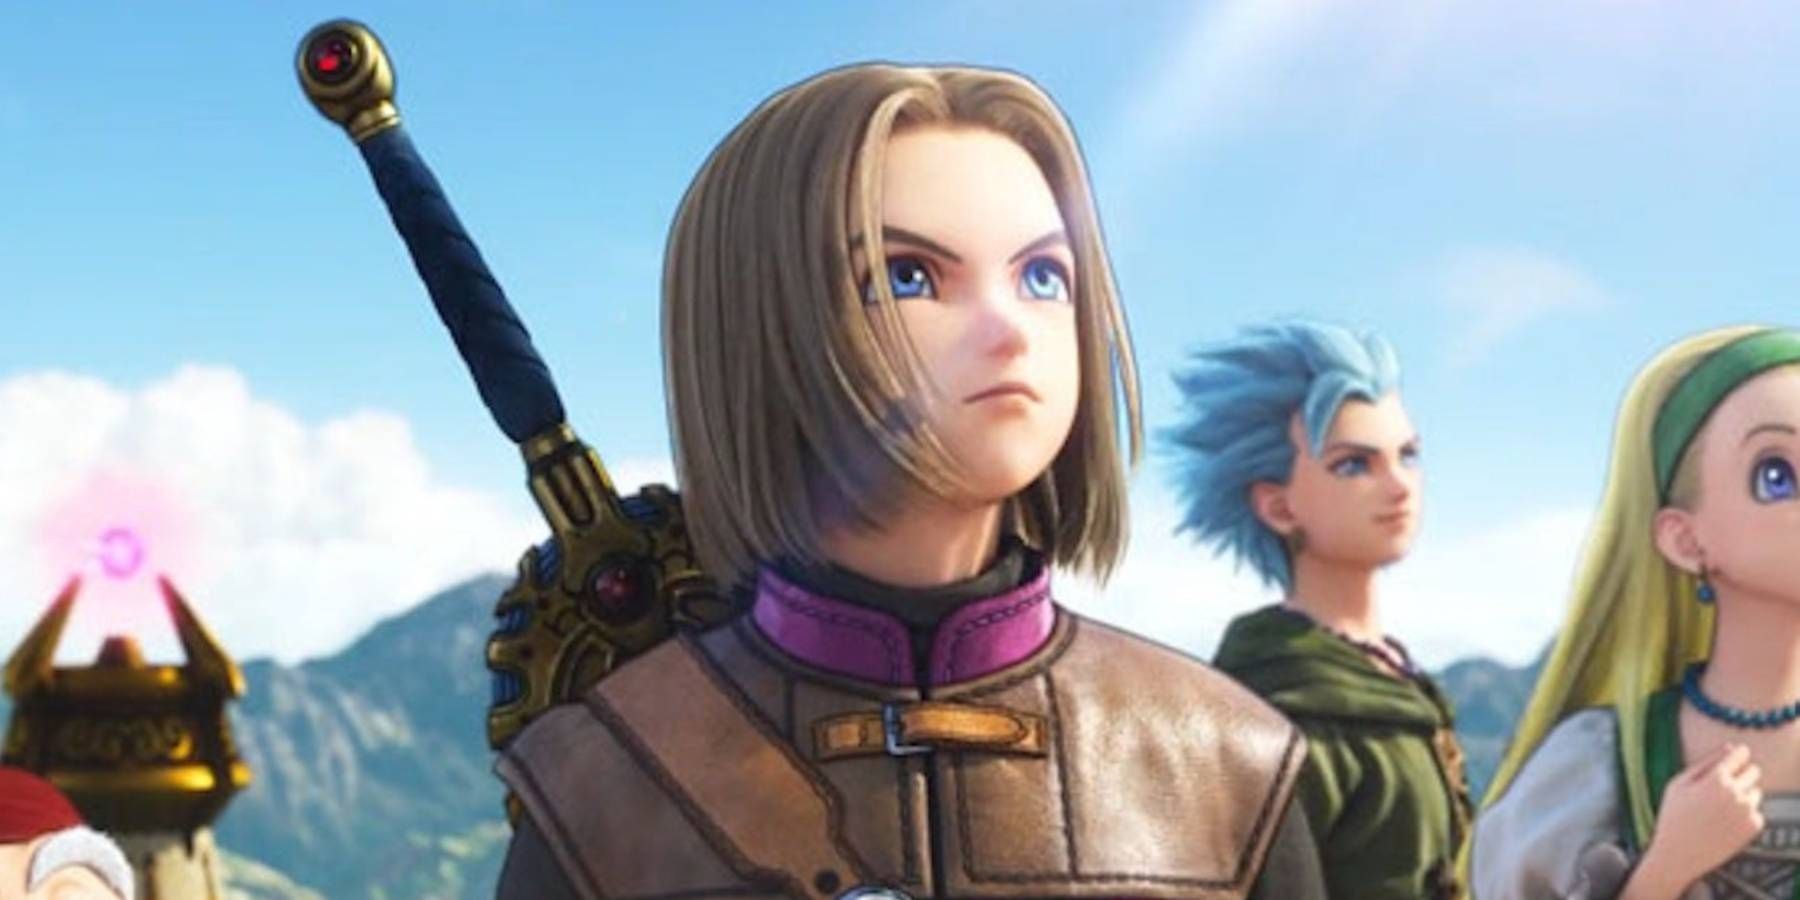 The Luminary and party members from Dragon Quest 11 looking into the distance